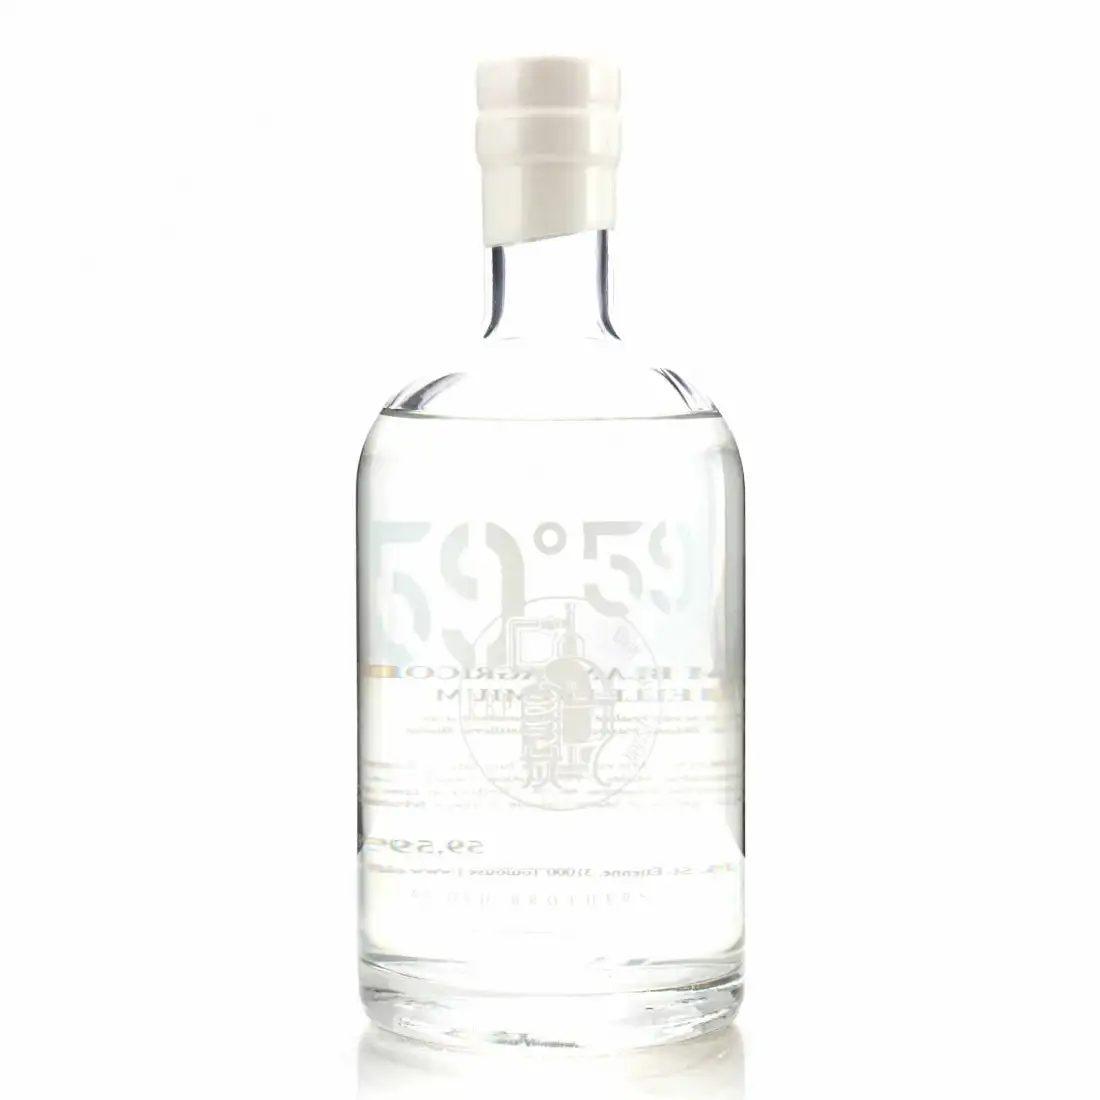 Image of the front of the bottle of the rum R.B.P